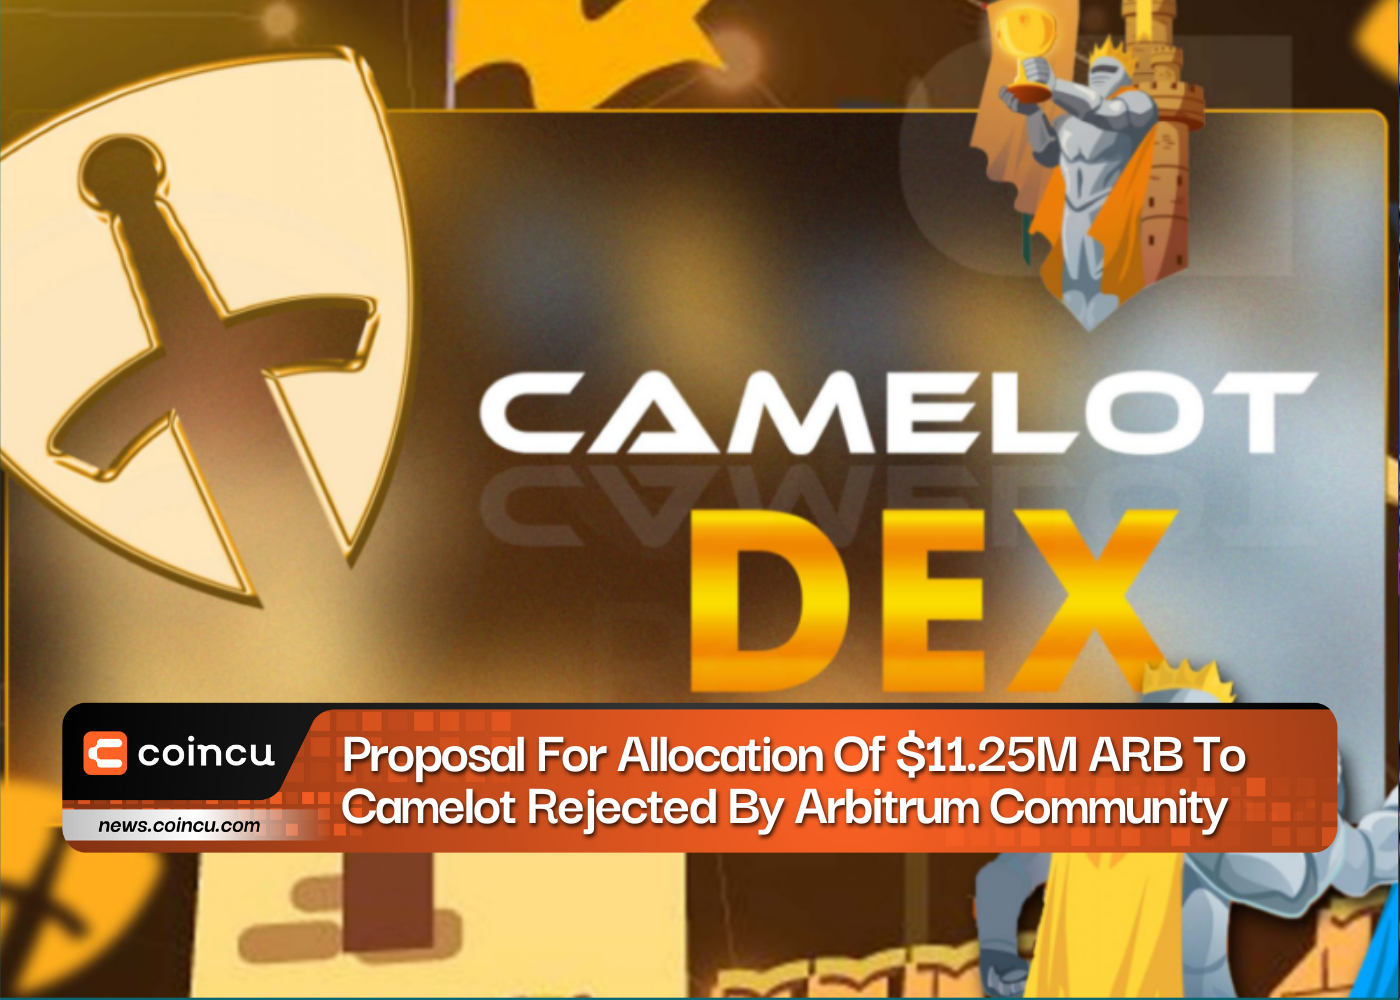 Proposal For Allocation Of $11.25M ARB To Camelot Rejected By Arbitrum Community